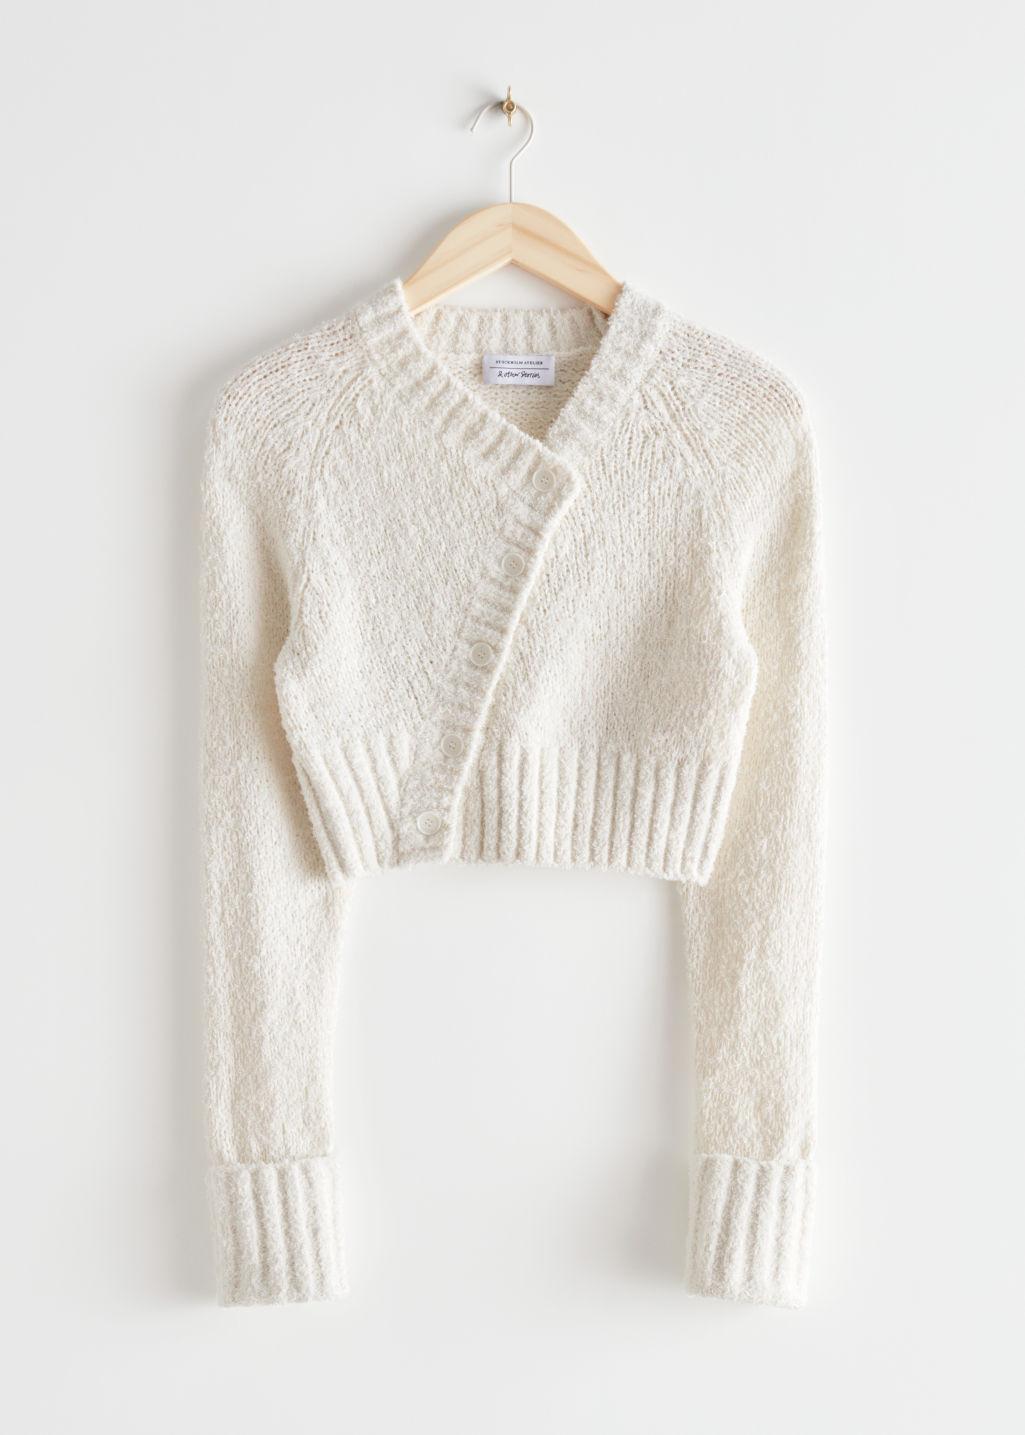 & Other Stories Asymmetric Knit Cardigan in White | Lyst